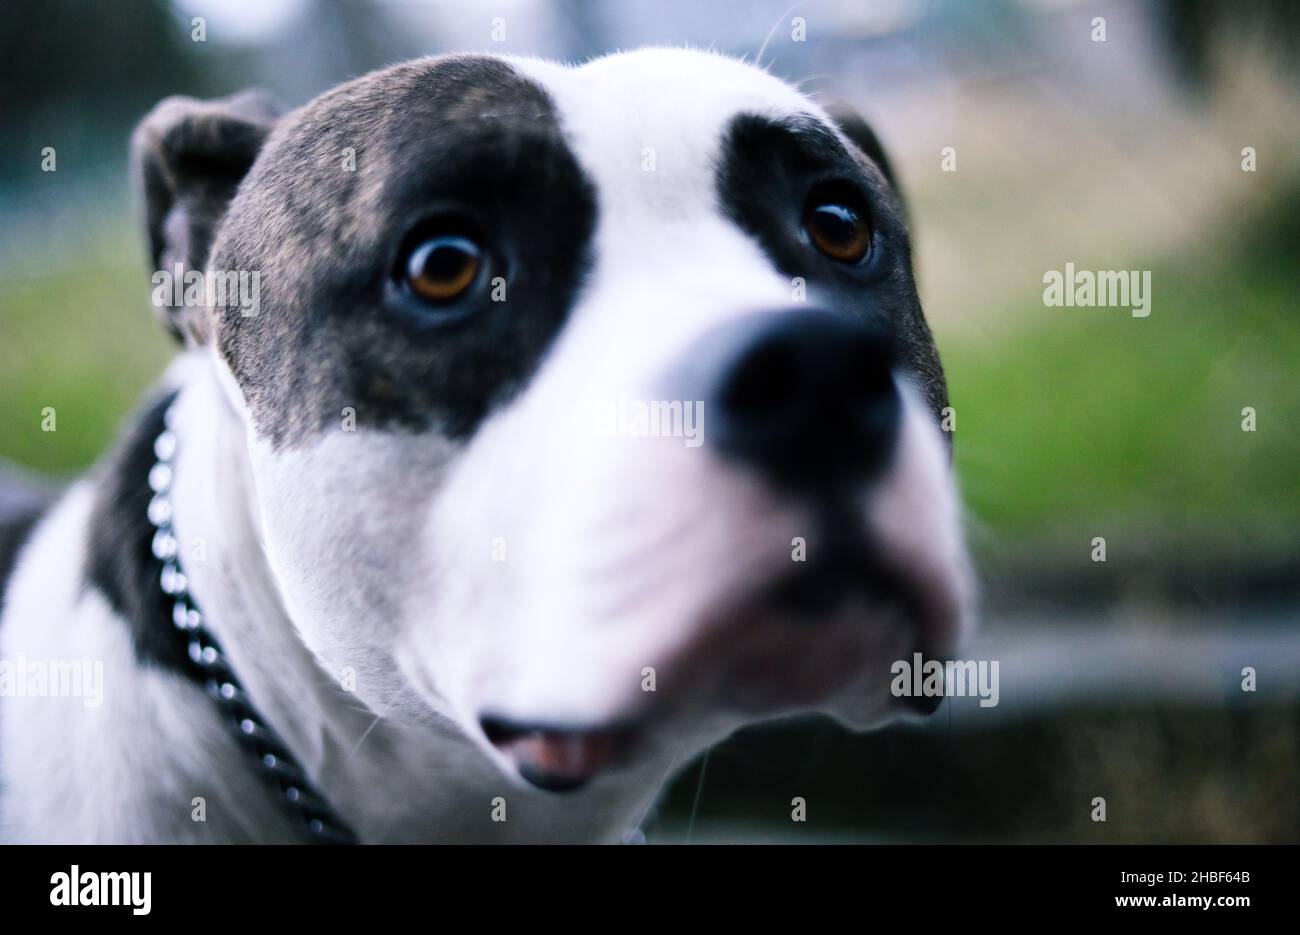 Brindle and White Pit Bull Portrait Stock Photo